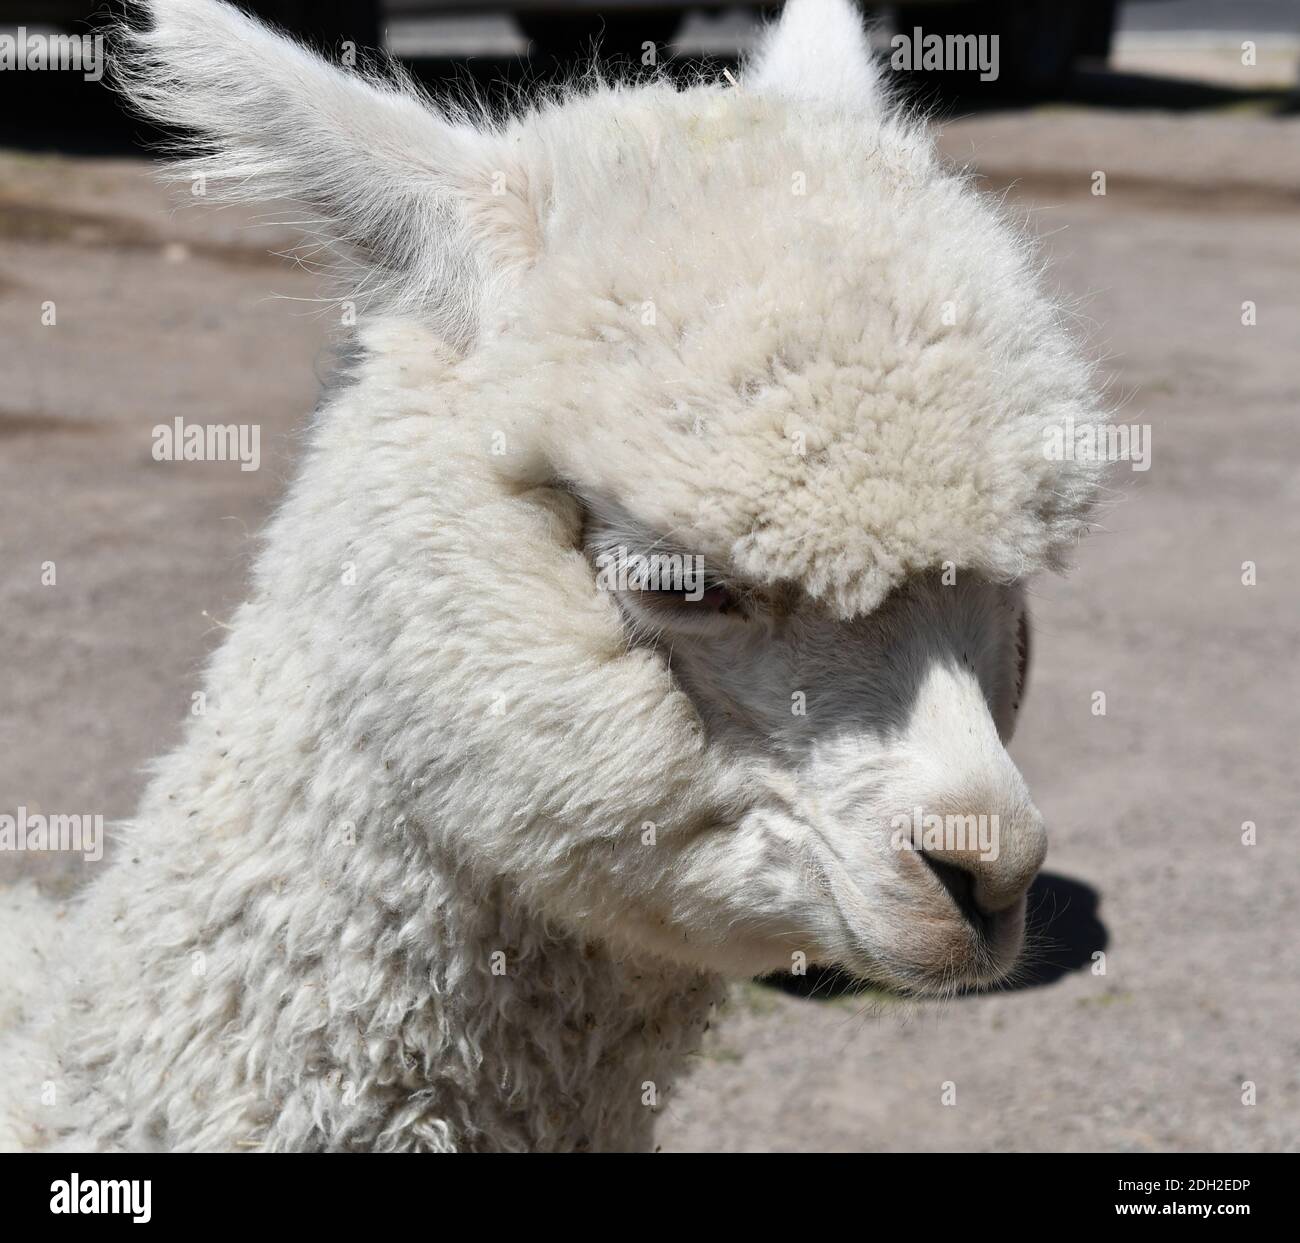 Alpaca close-up portrait in Peru. Lamas and alpacas are the two domestic animals from the camel family in South America. Stock Photo